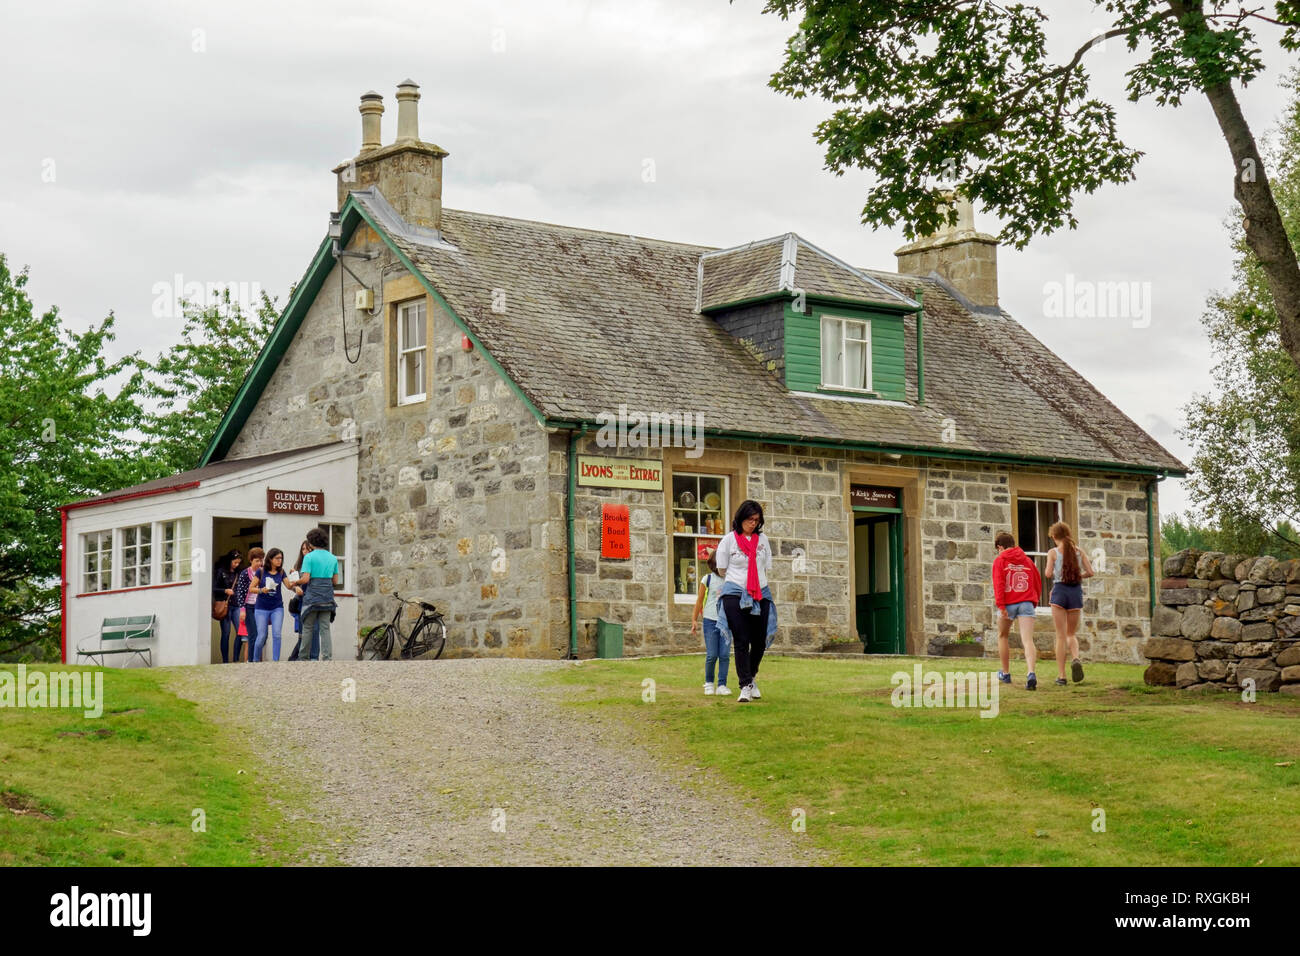 Aultlarie Farmhouse in the Highland Folk Museum at Newtonmore, Scotland. The house also contains Glenlivet Post Office and Kirk's Store. Stock Photo